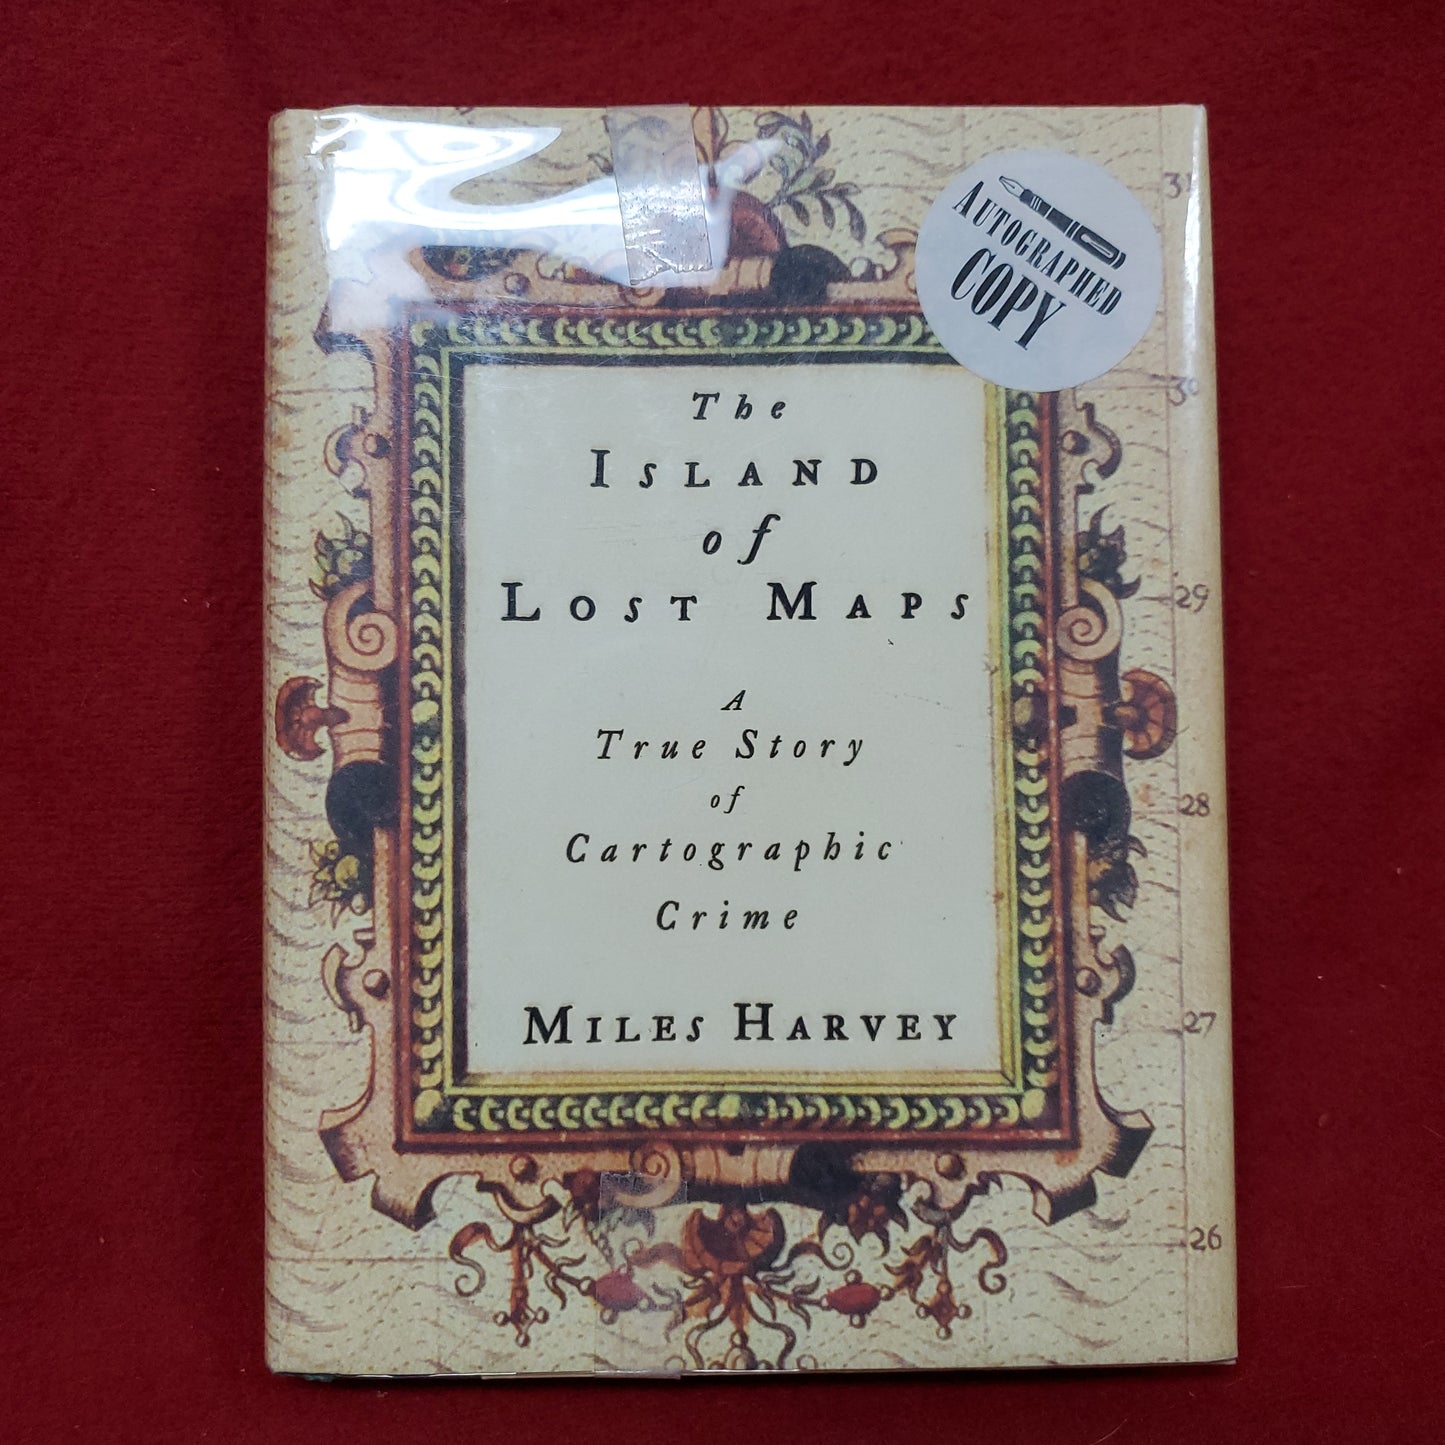 Vintage "The Island of Lost Maps" by Miles Harvey - 2000 (Sept)